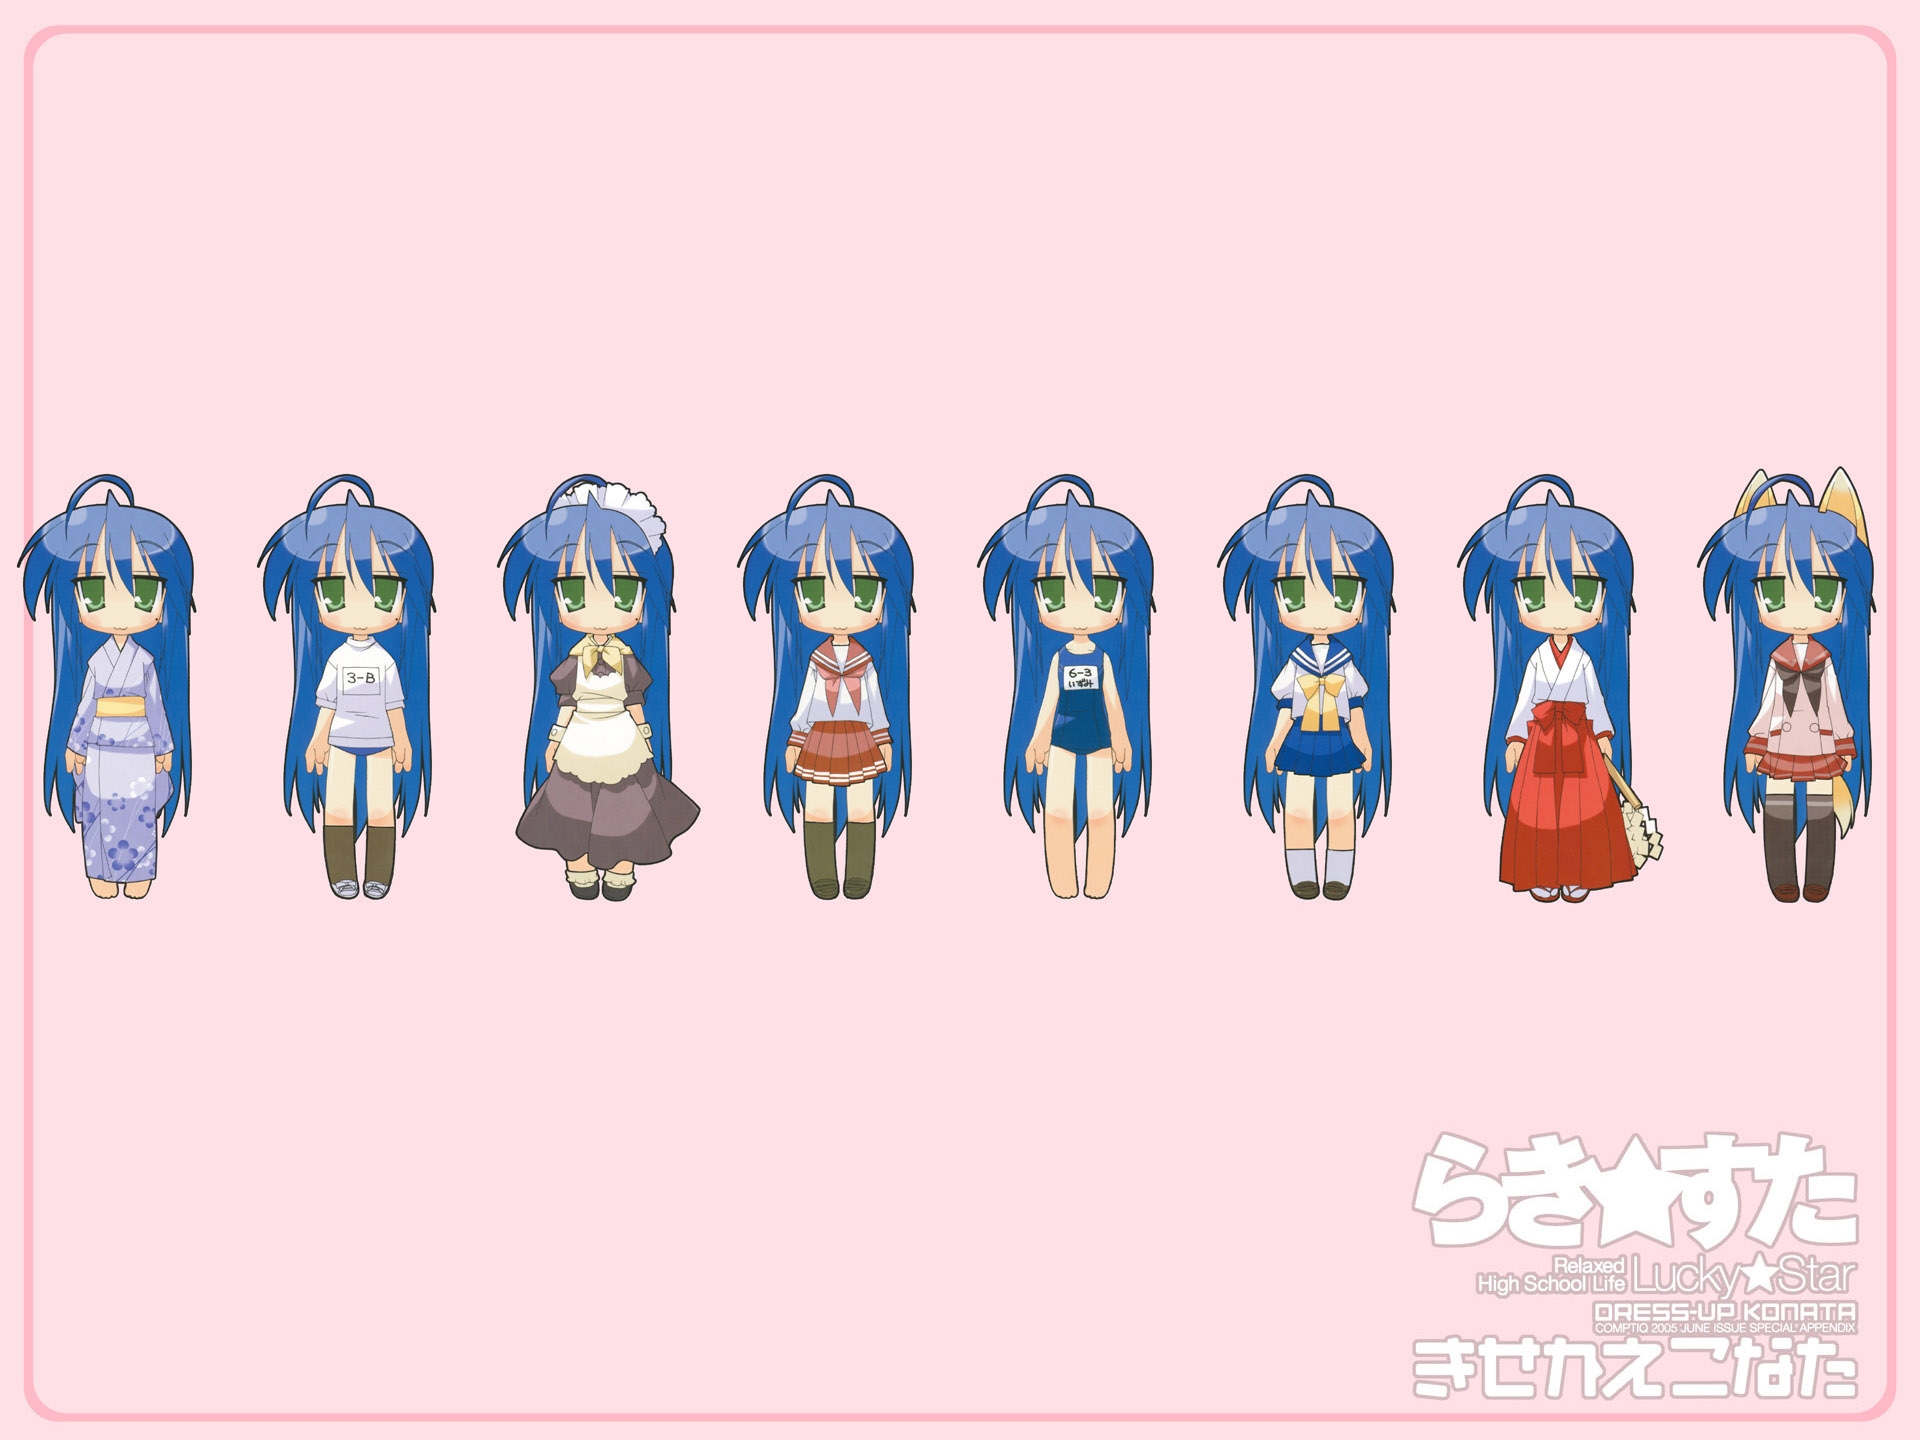 100+] Lucky Star Wallpapers | Wallpapers.com